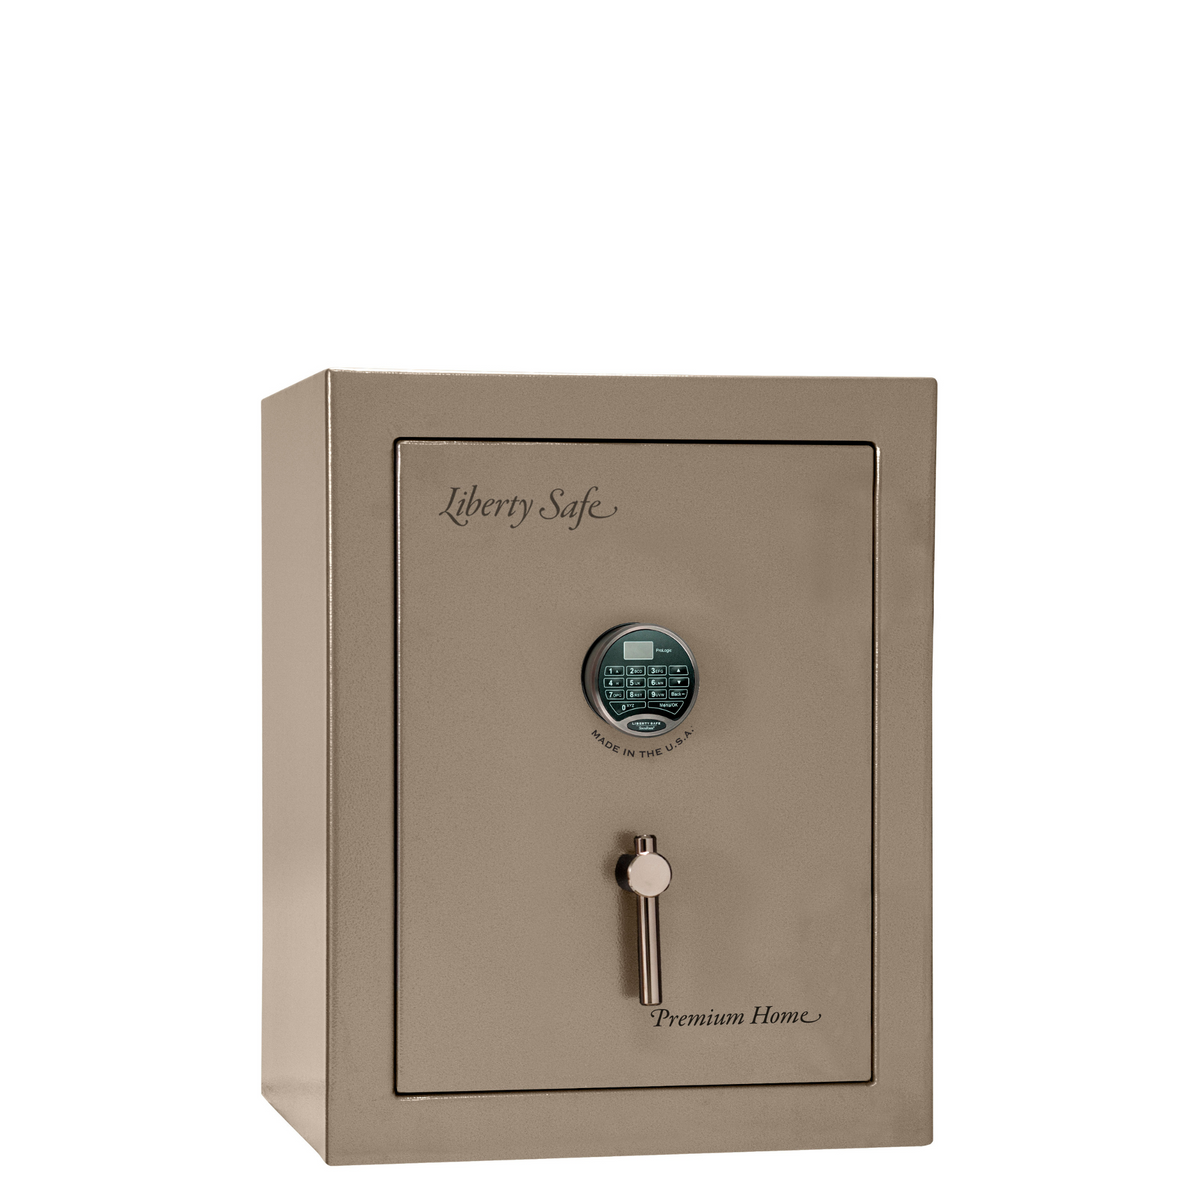 Premium Home Series | Level 7 Security | 2 Hour Fire Protection | 08 | Dimensions: 29.75"(H) x 24.5"(W) x 19"(D) | Champagne Marble - Closed Door